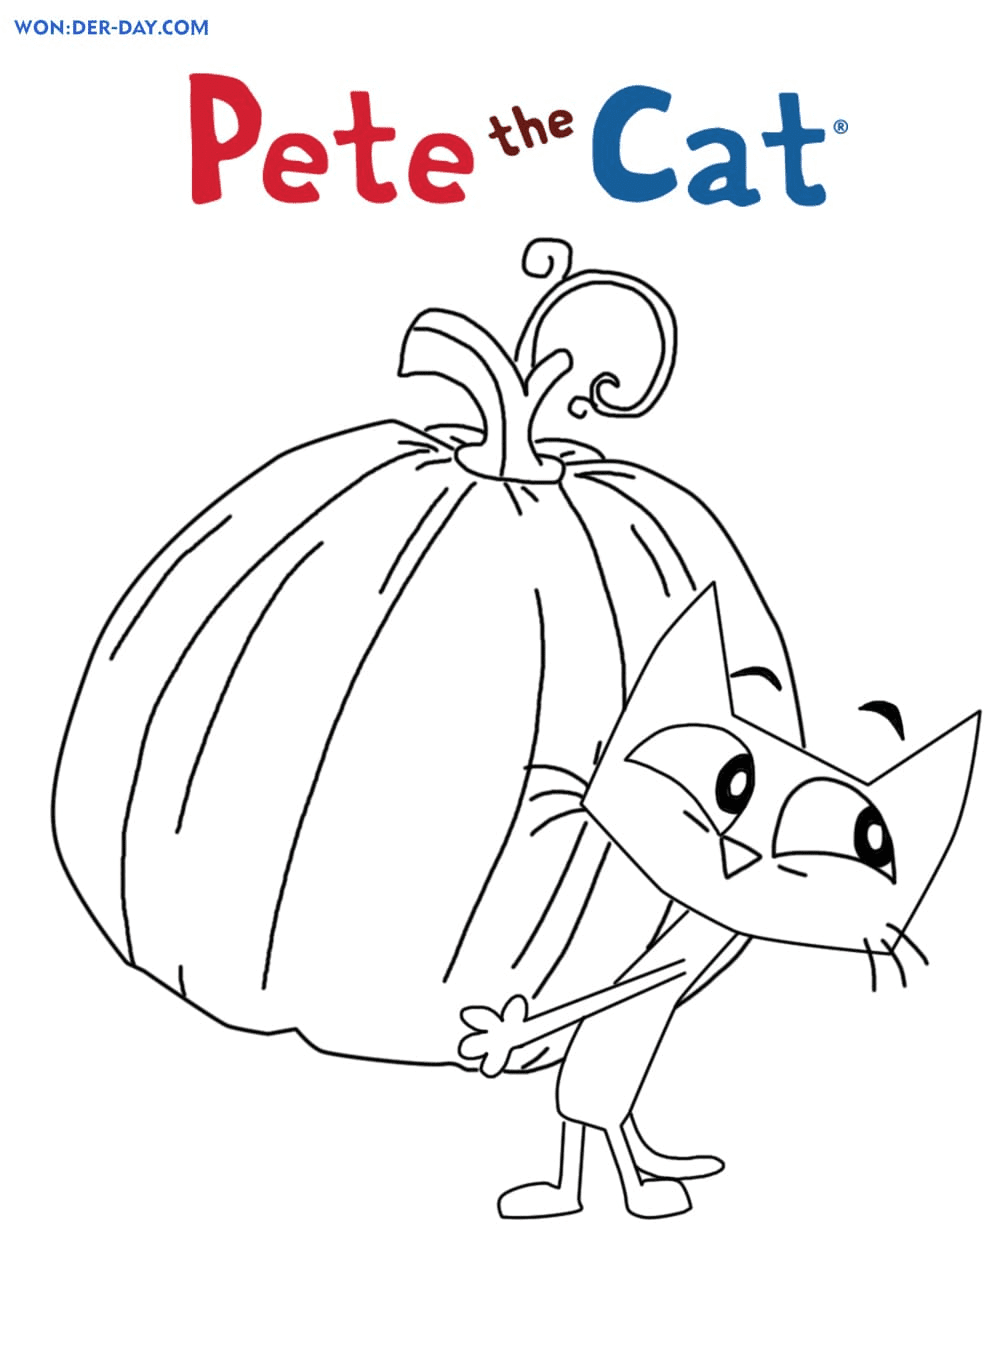 Pete the Cat with Pumpkin Coloring Page